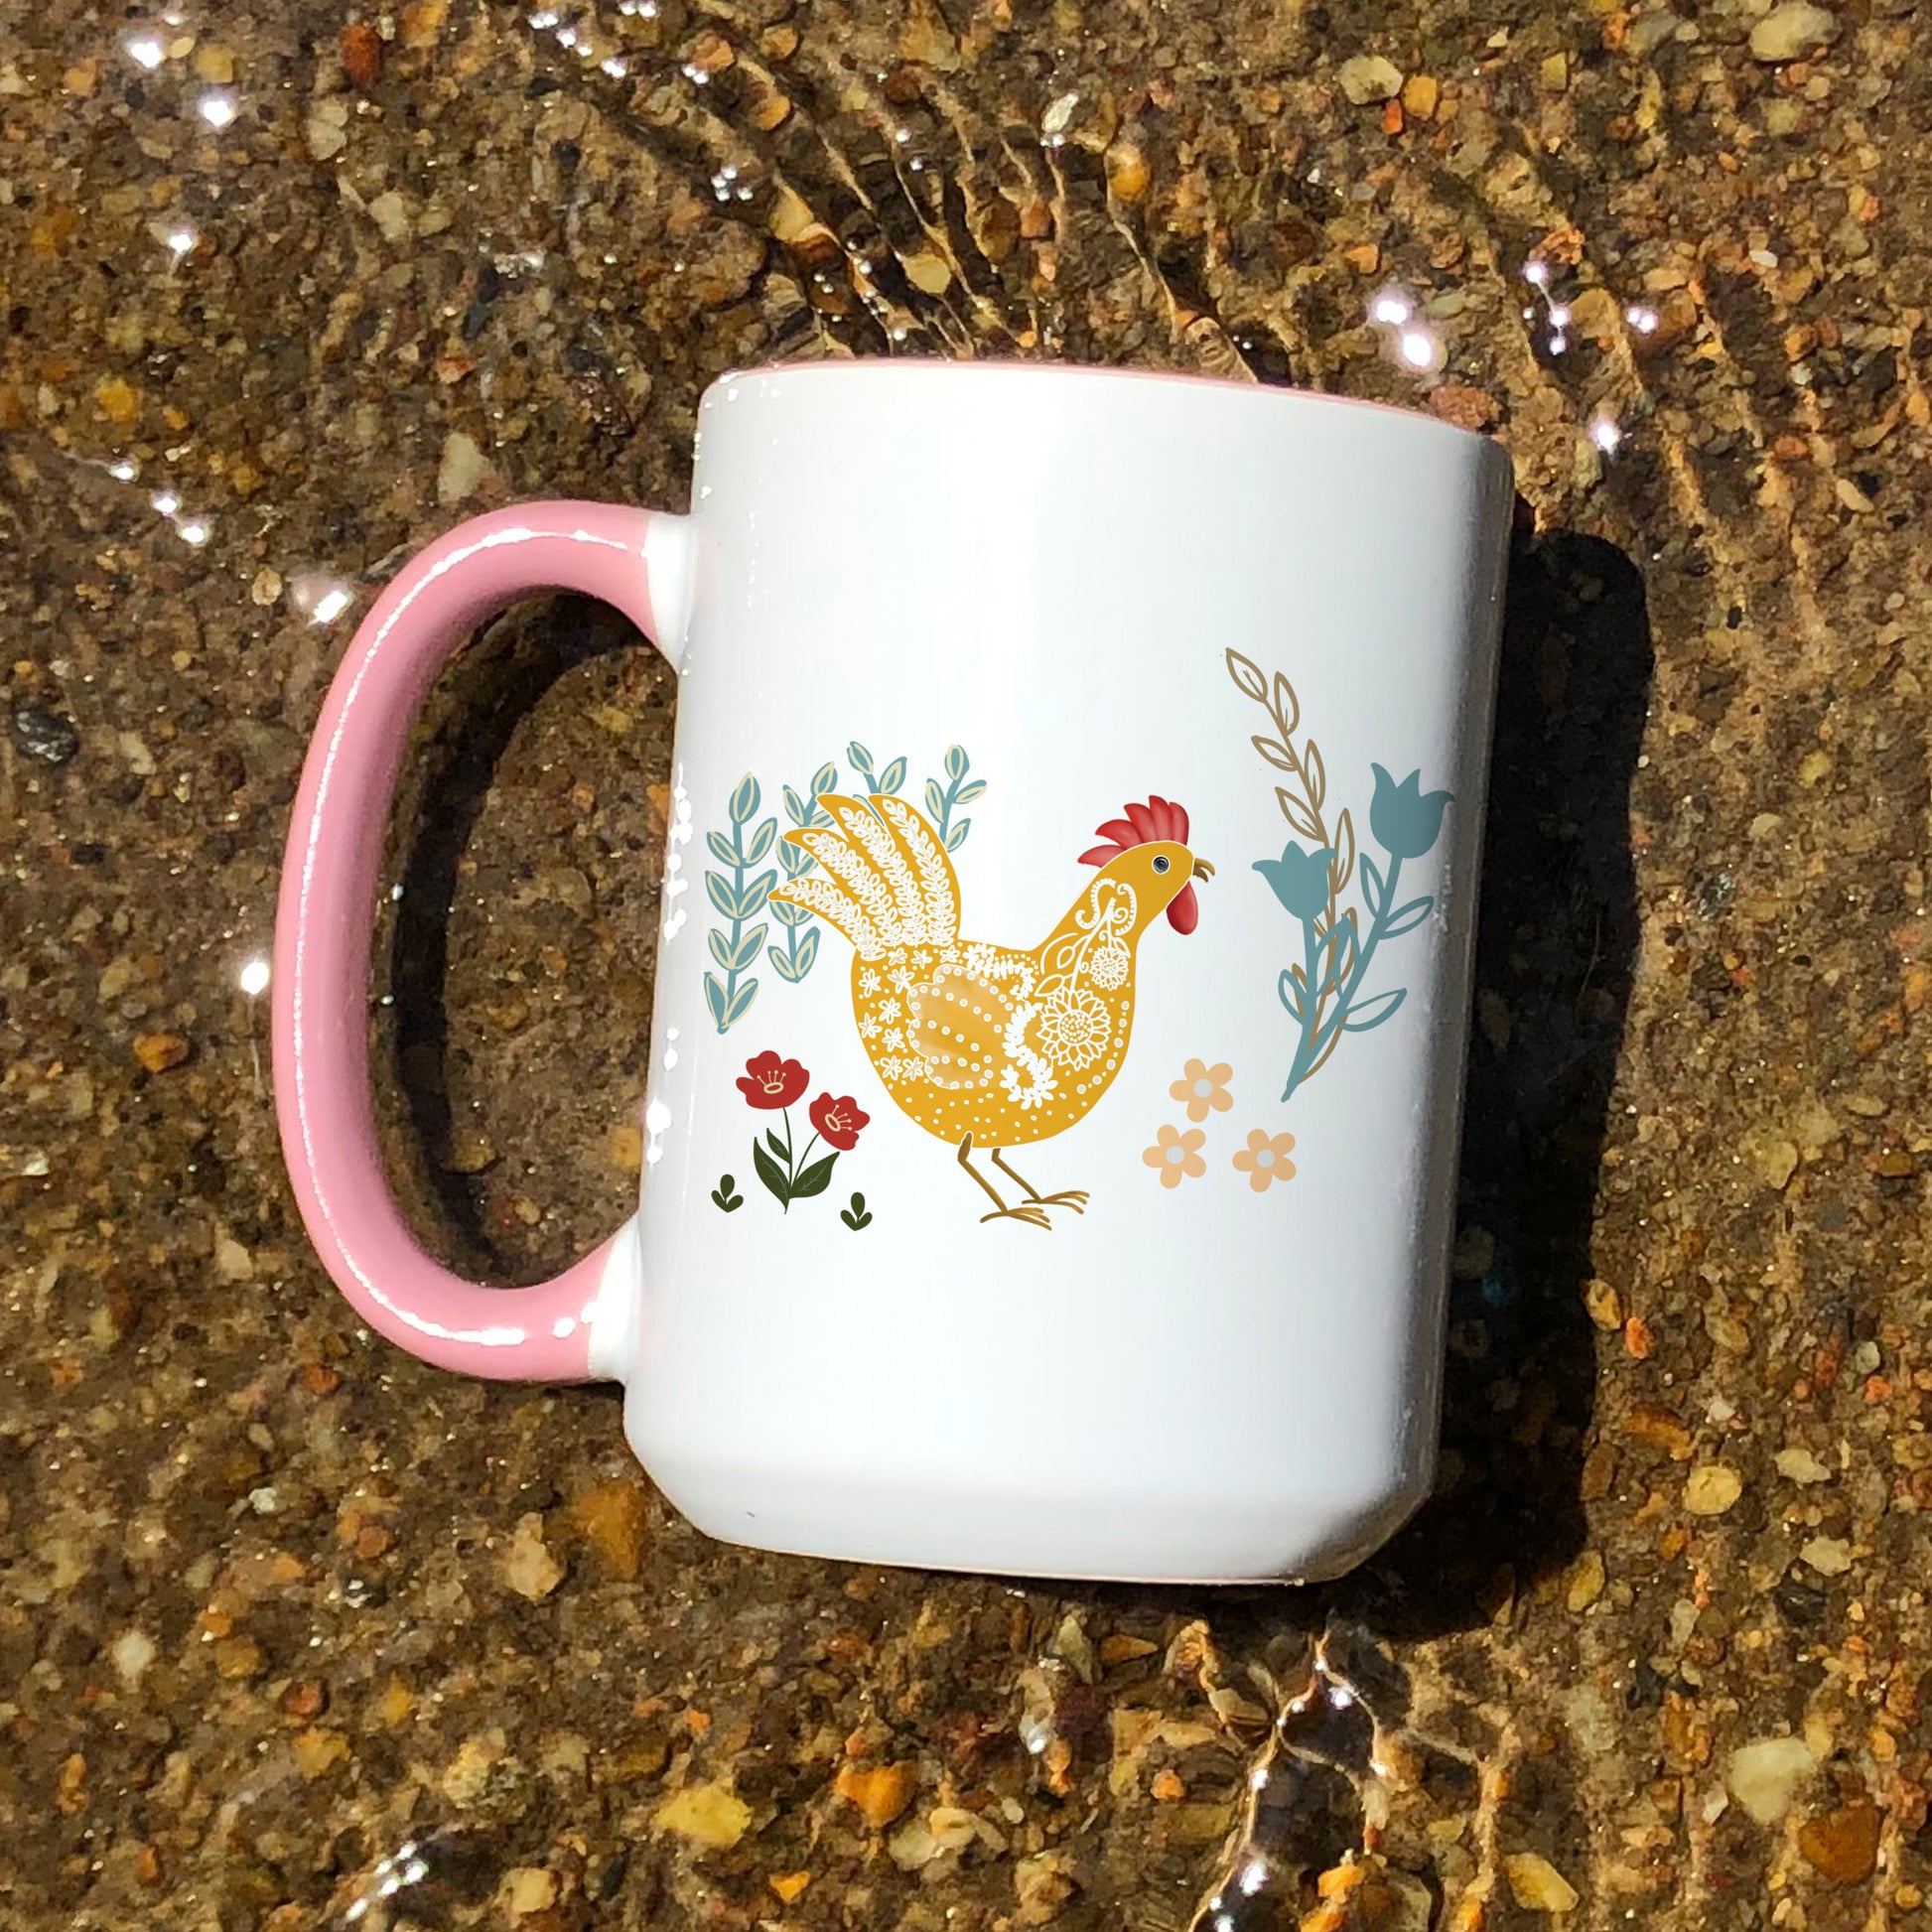 Chicken and rooster themed pink handle ceramic mug with floral designs in blue, yellow, and red with water ripples in the background.